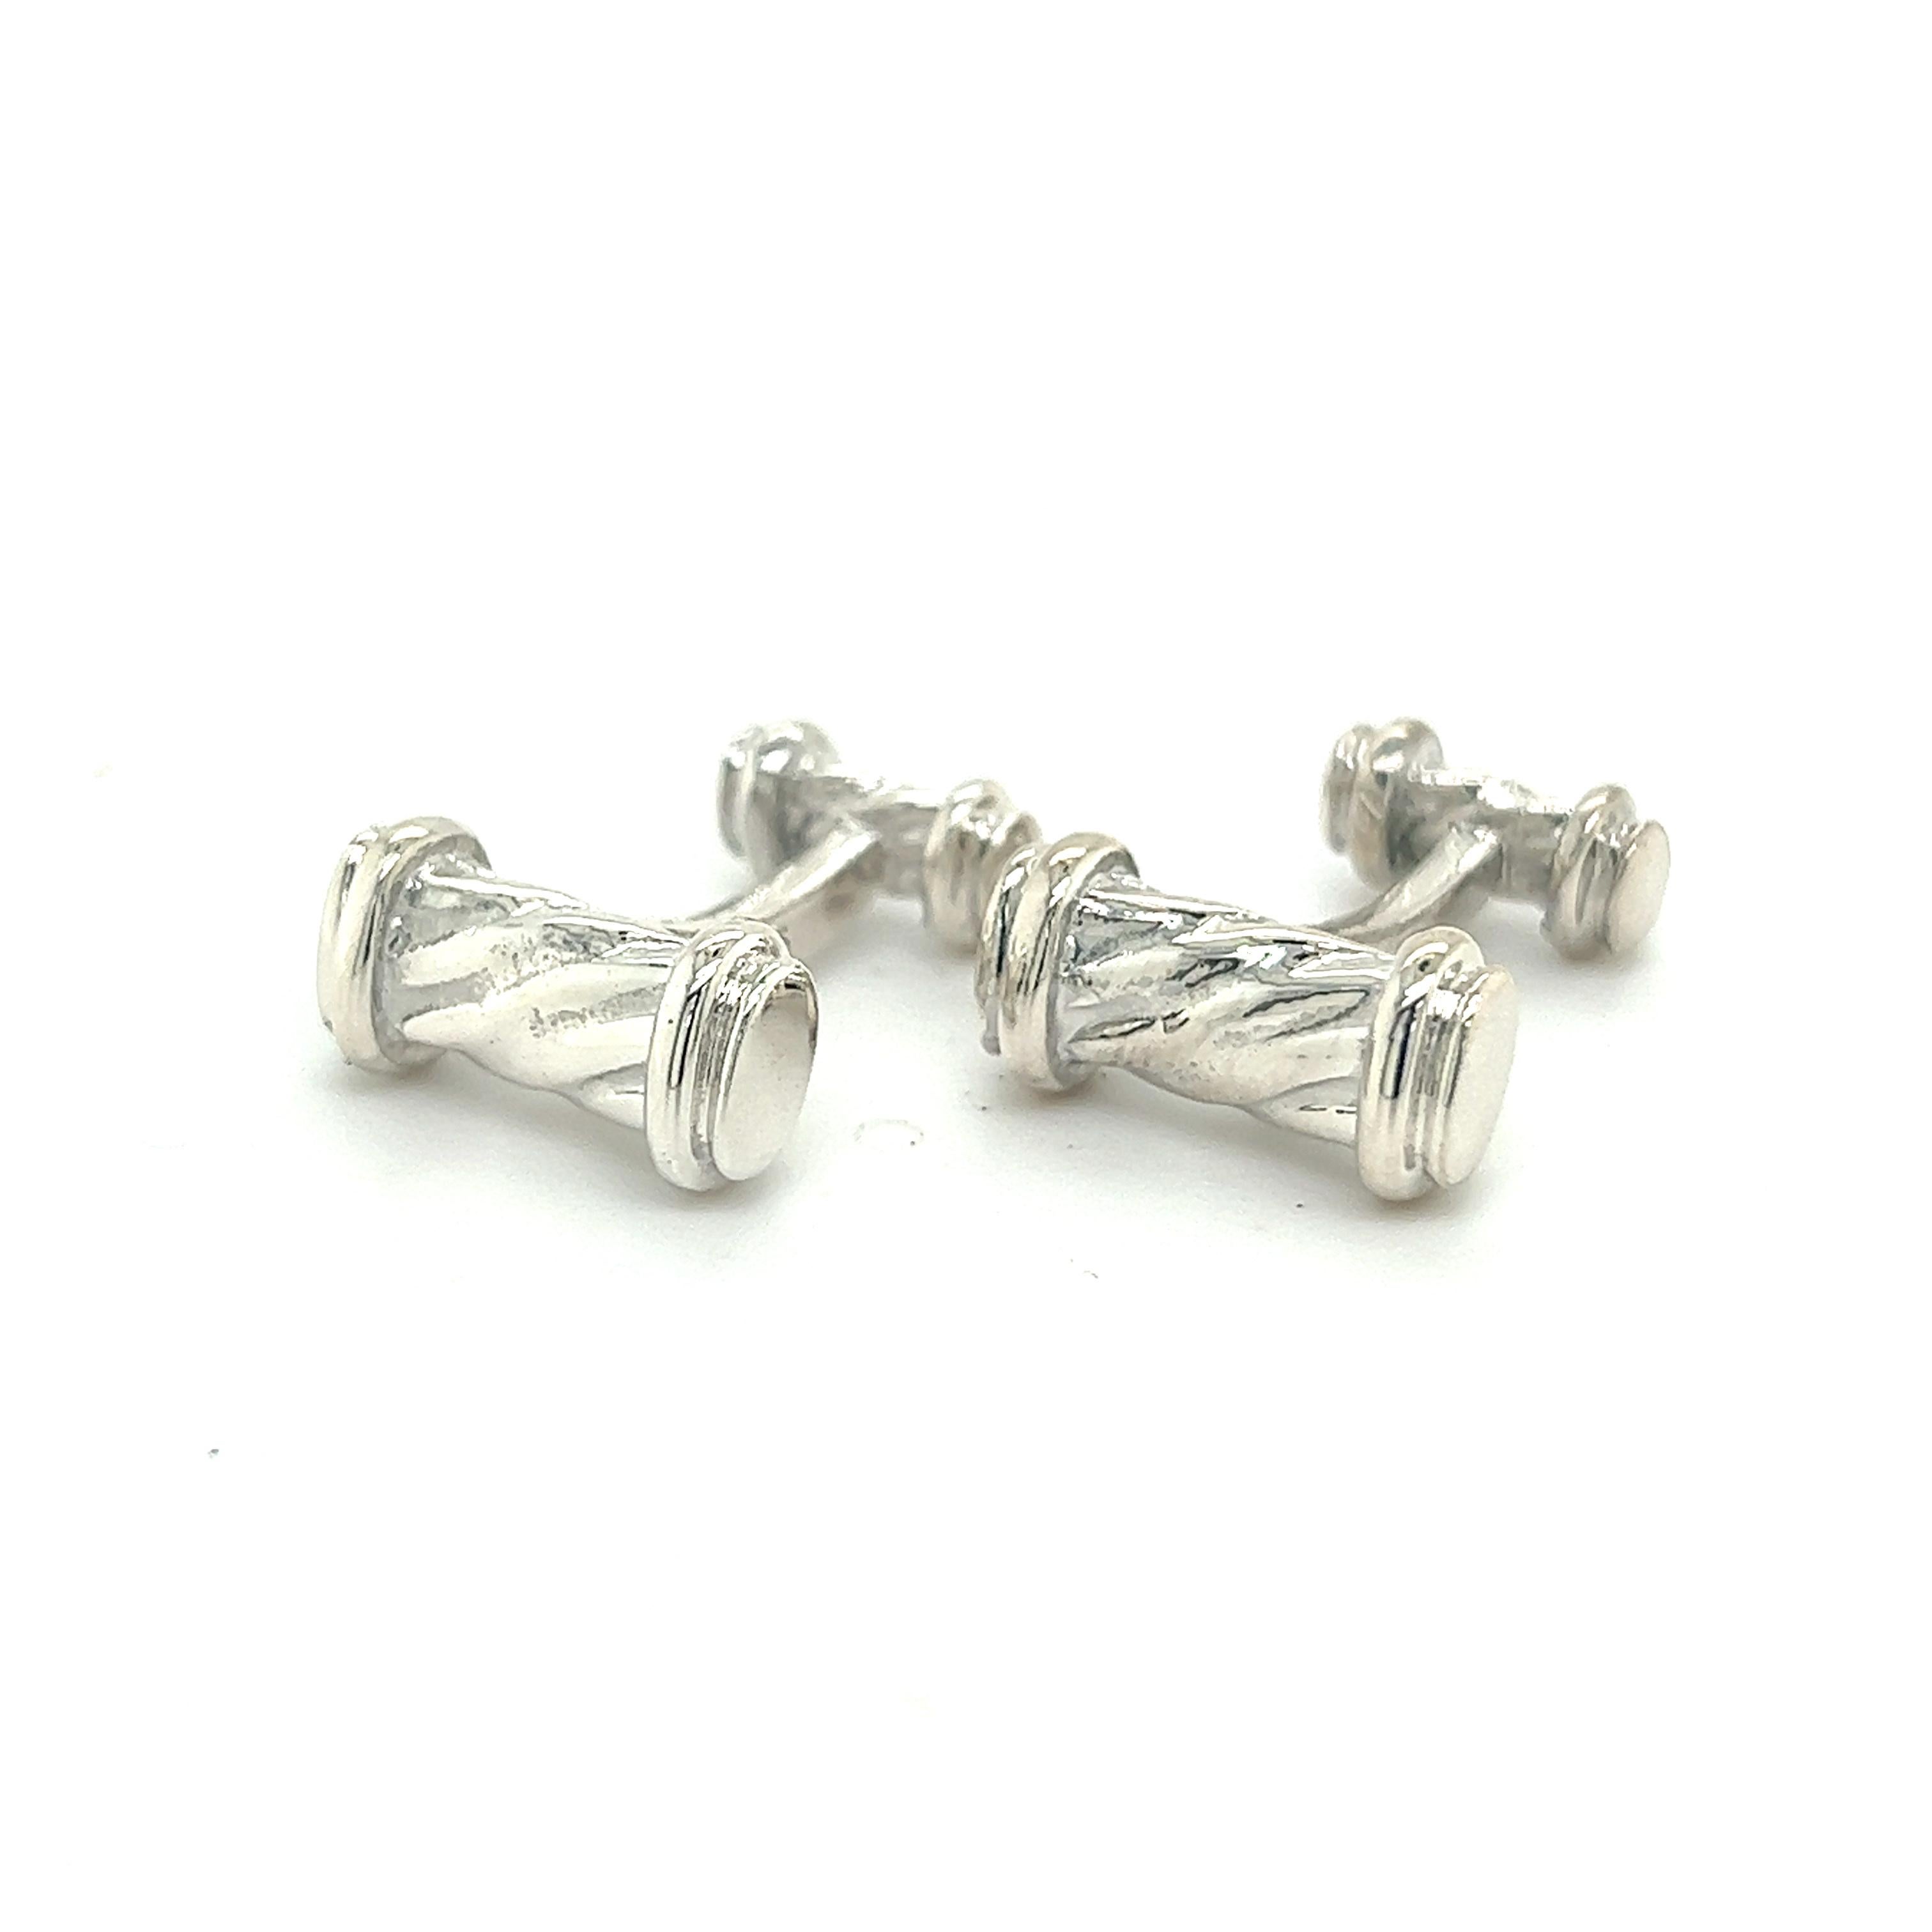 Tiffany & Co Estate Cufflinks Sterling Silver TIF306

These elegant Authentic Tiffany & Co Men's Cufflinks are made of sterling silver and have a weight of 10 grams.

TRUSTED SELLER SINCE 2002

PLEASE SEE OUR HUNDREDS OF POSITIVE FEEDBACKS FROM OUR